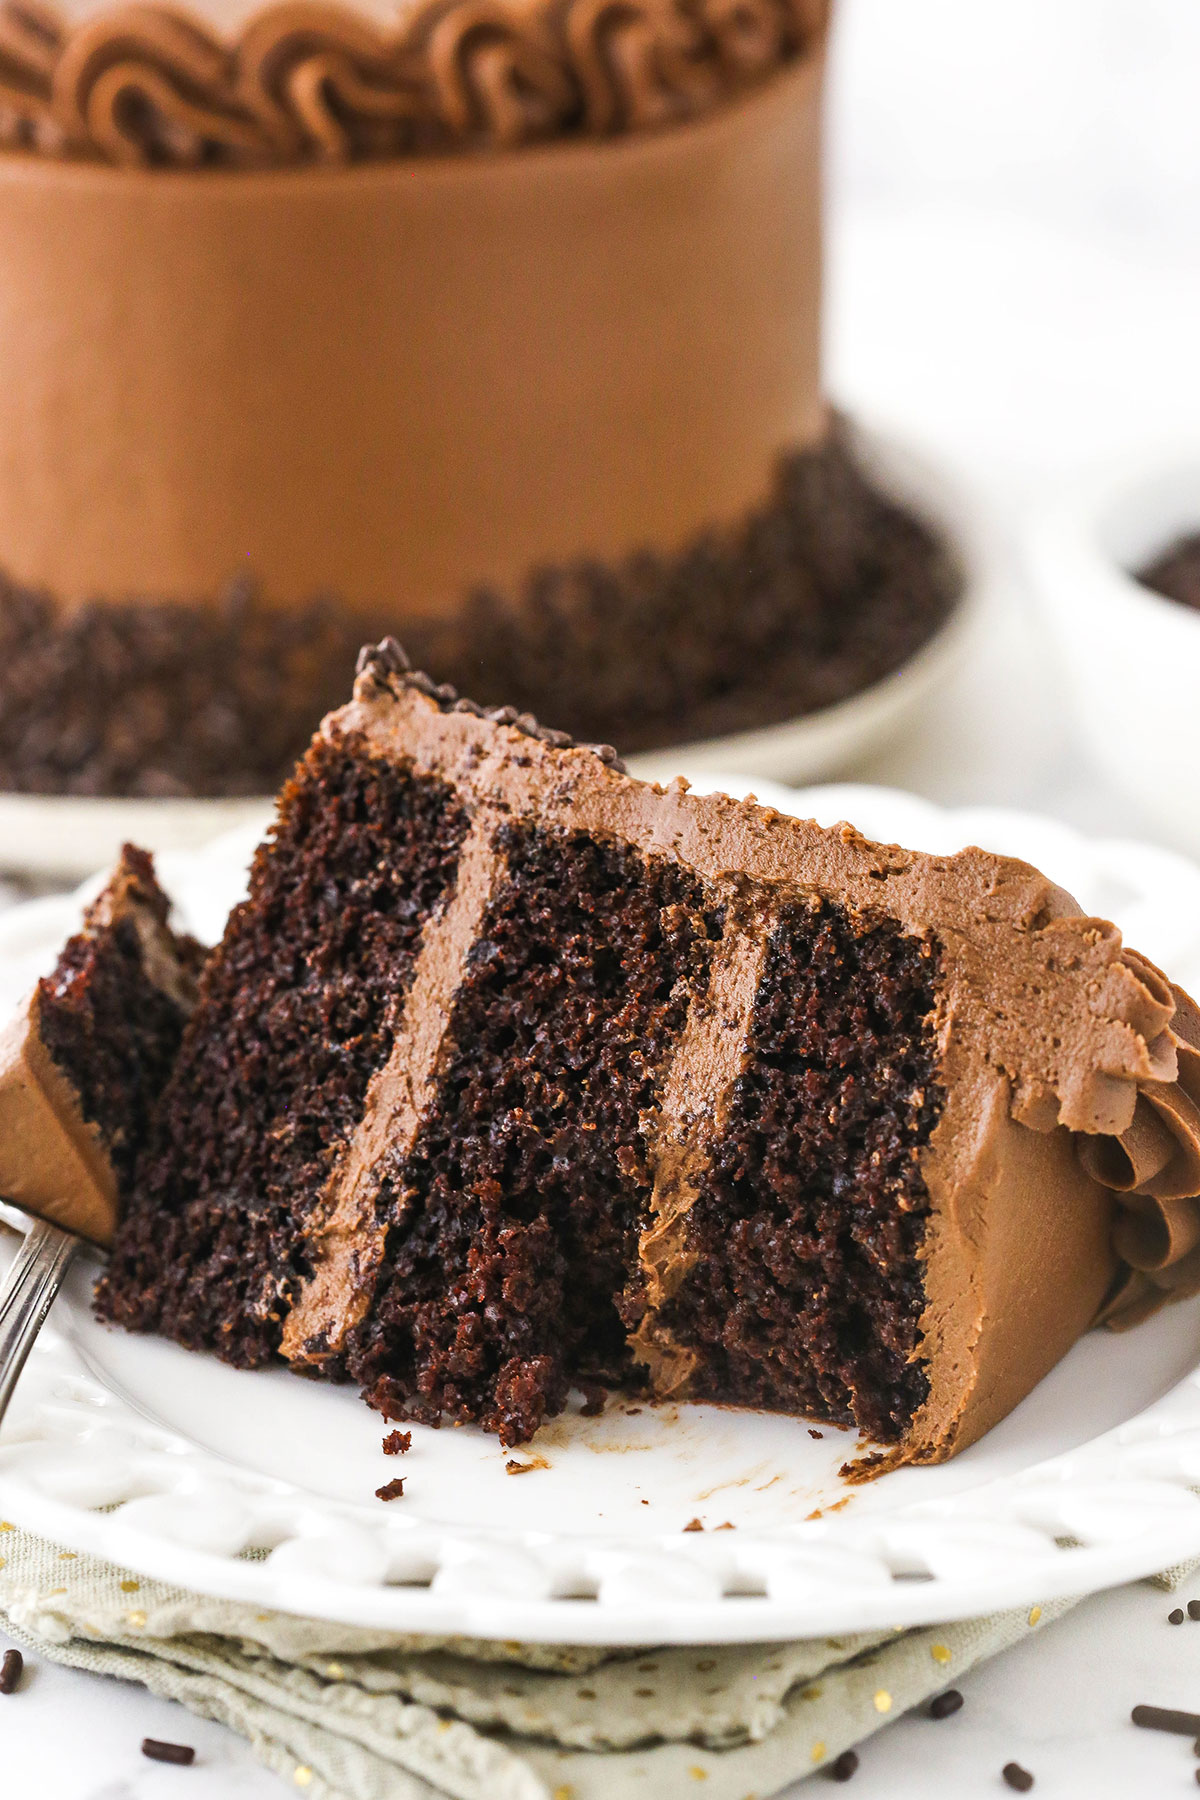 How to Make an Easy and Delicious Chocolate Cake